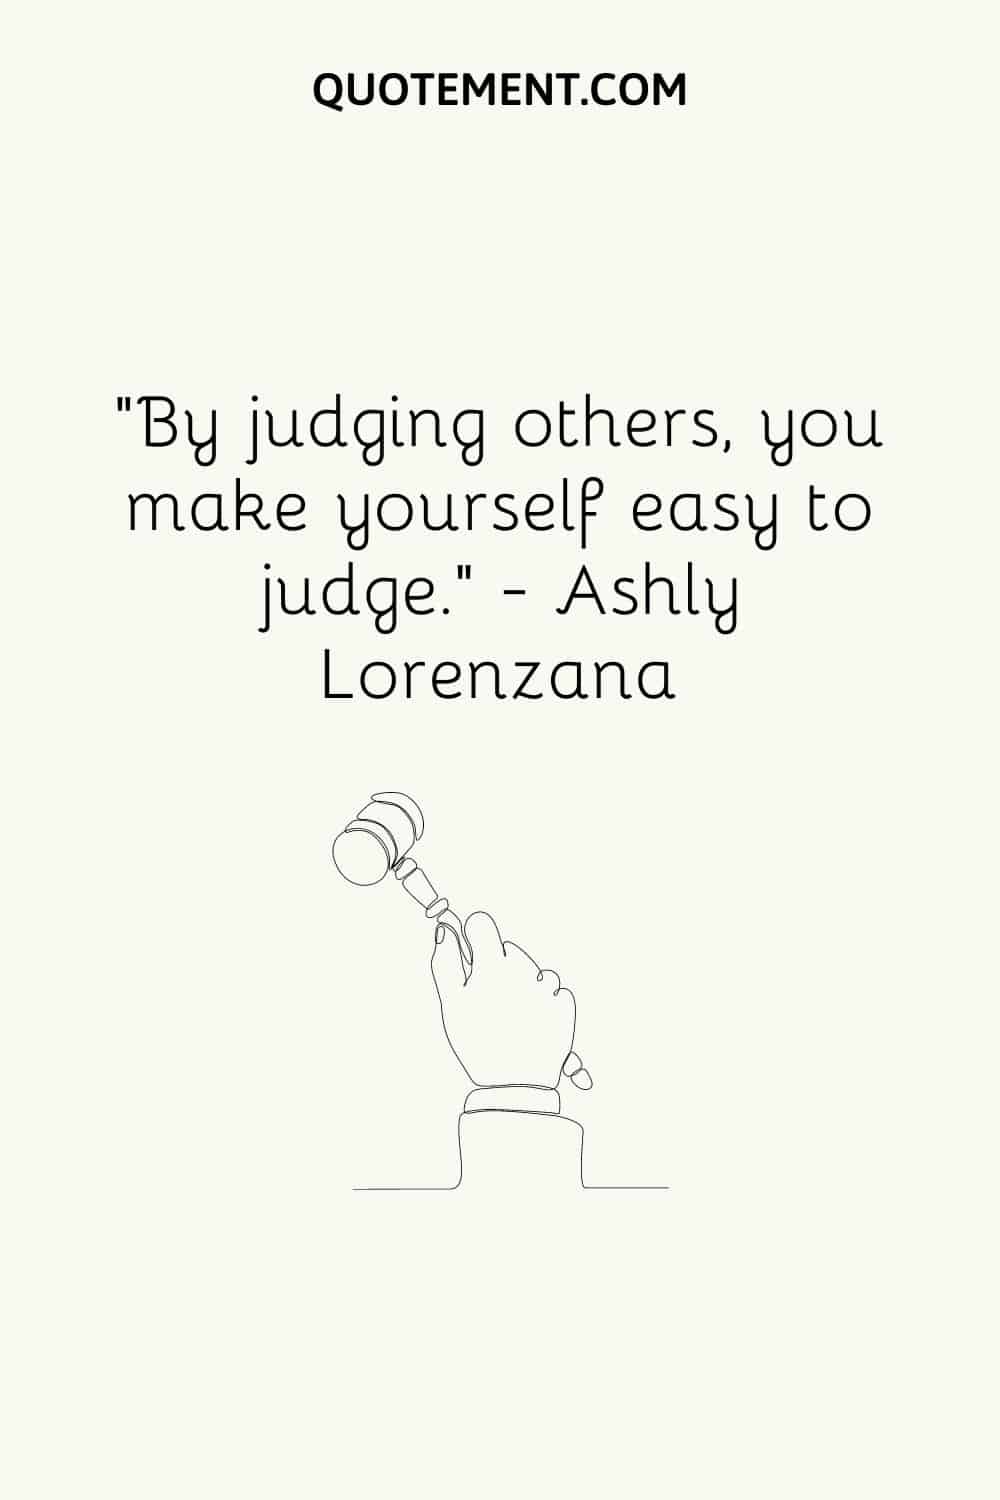 “By judging others, you make yourself easy to judge.” — Ashly Lorenzana